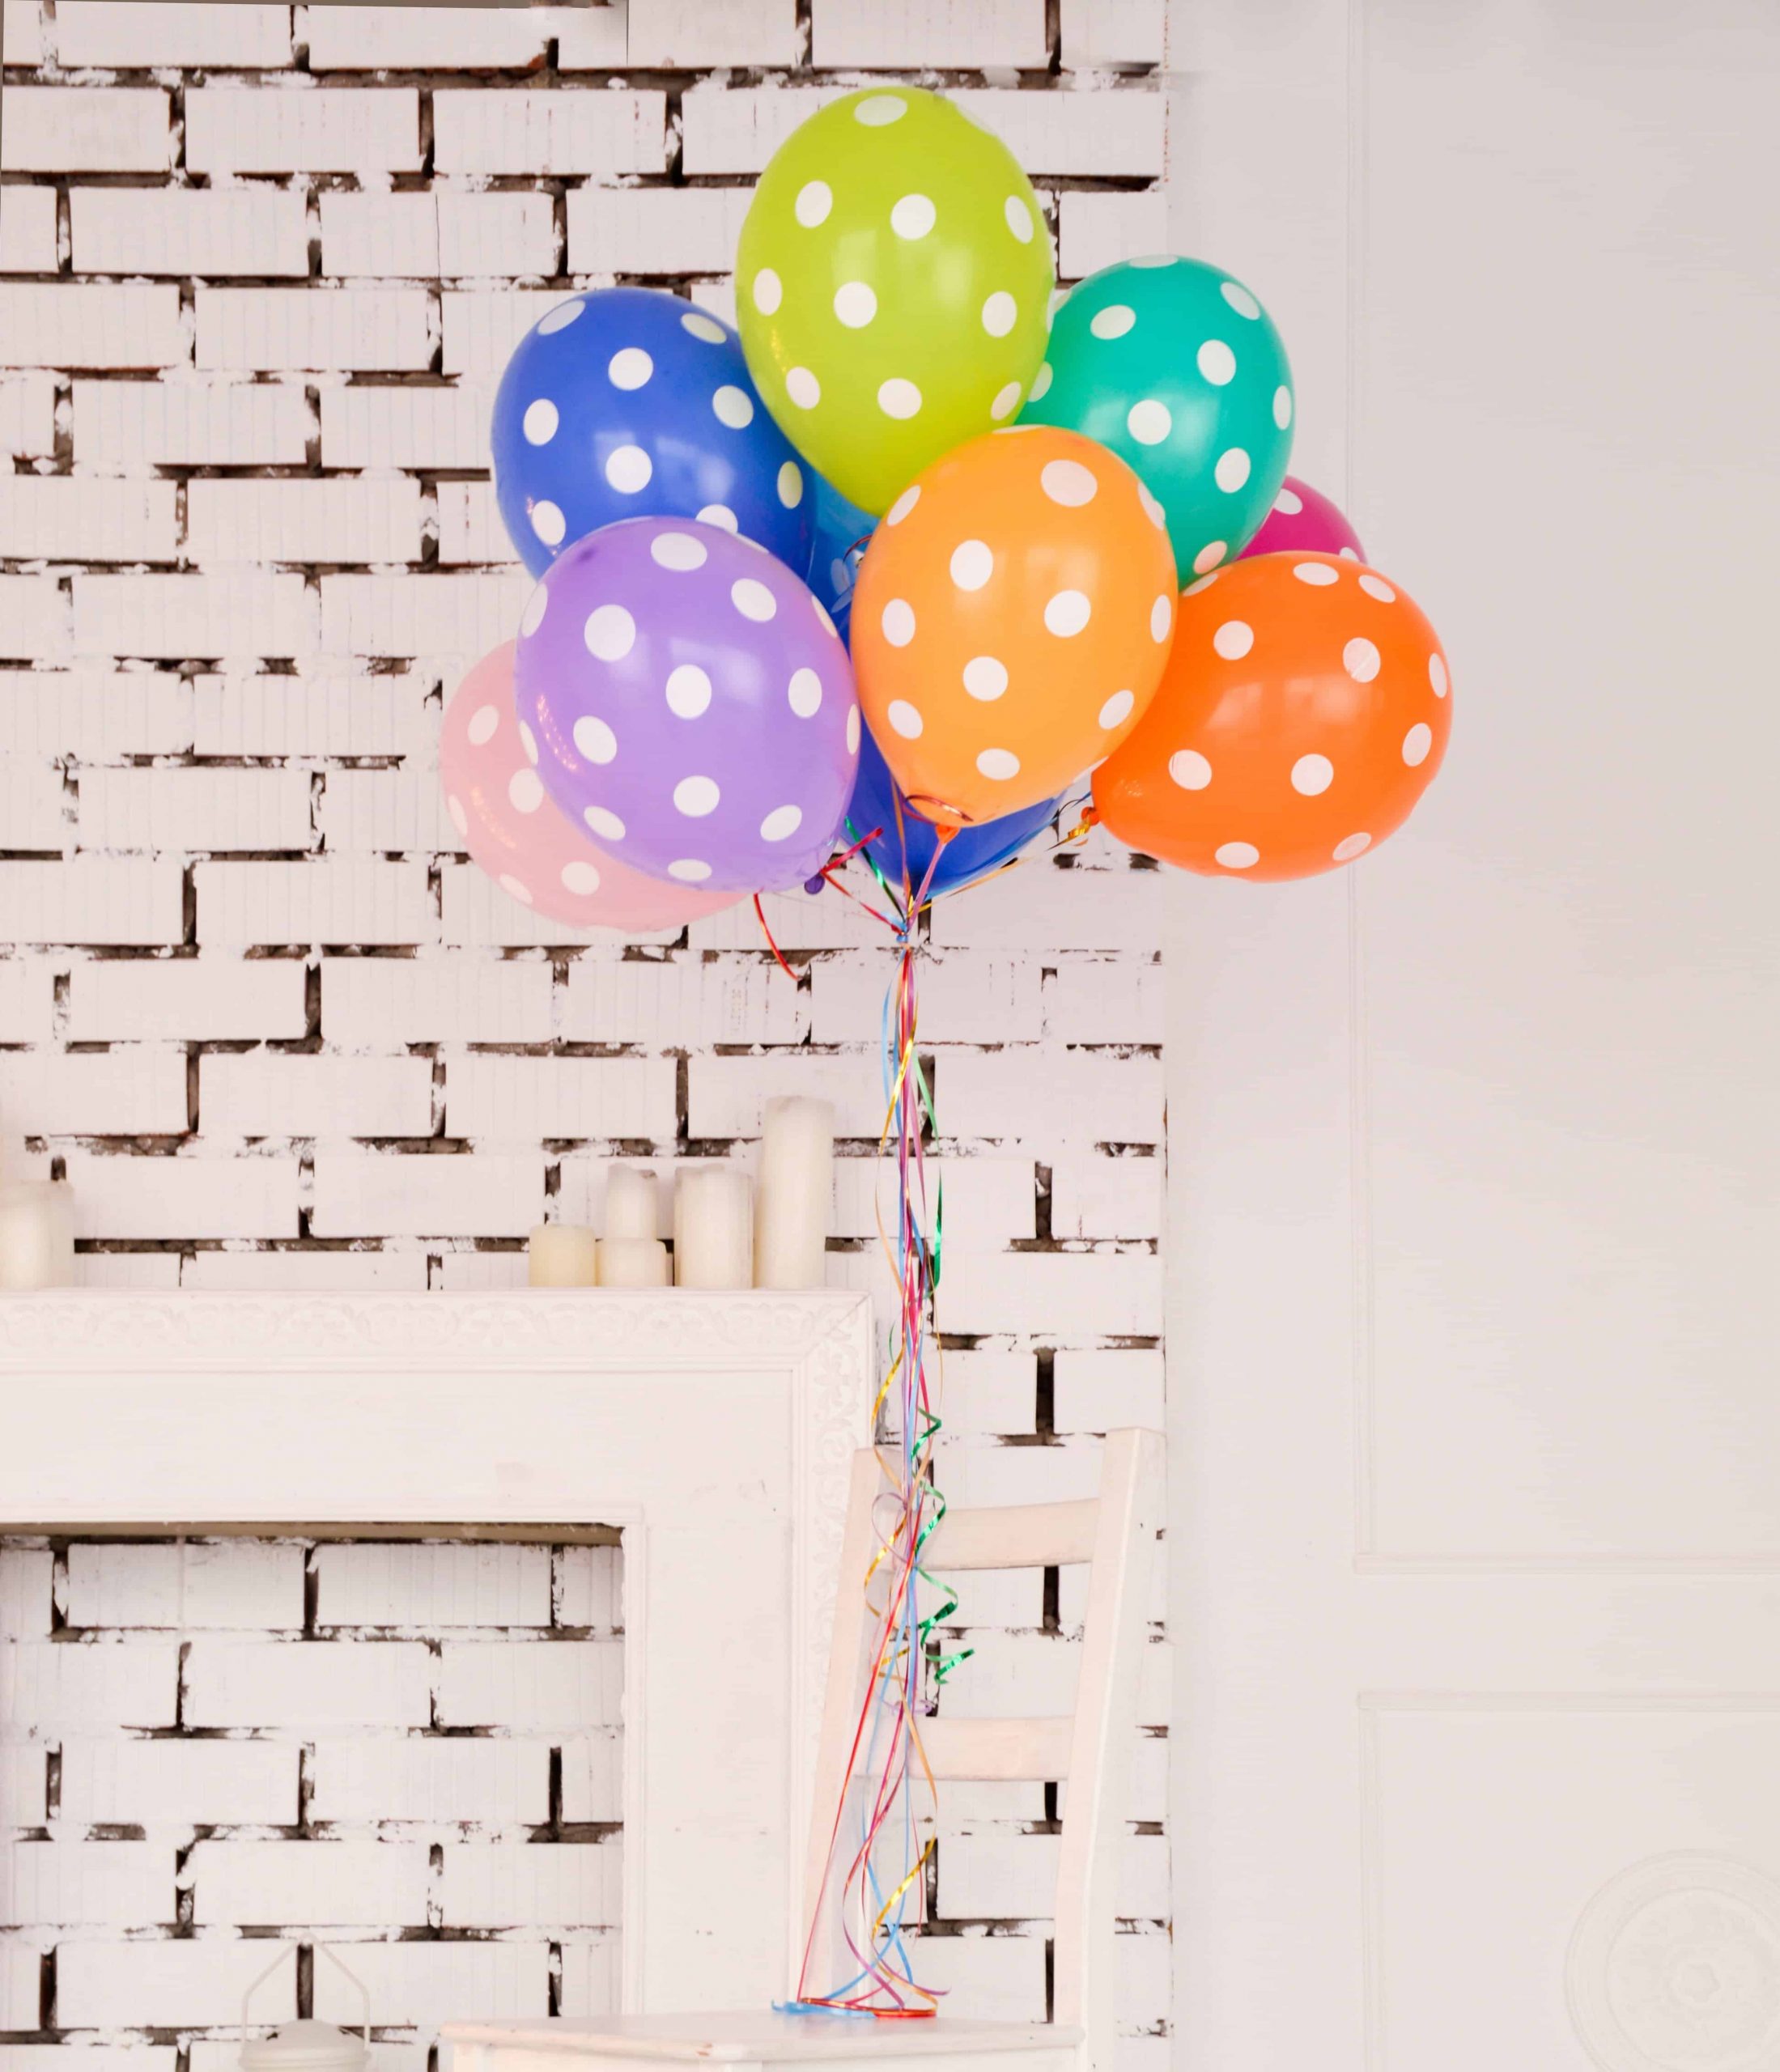 9 Fantastic Birthday Party Themes for Tween Girls She'll Love